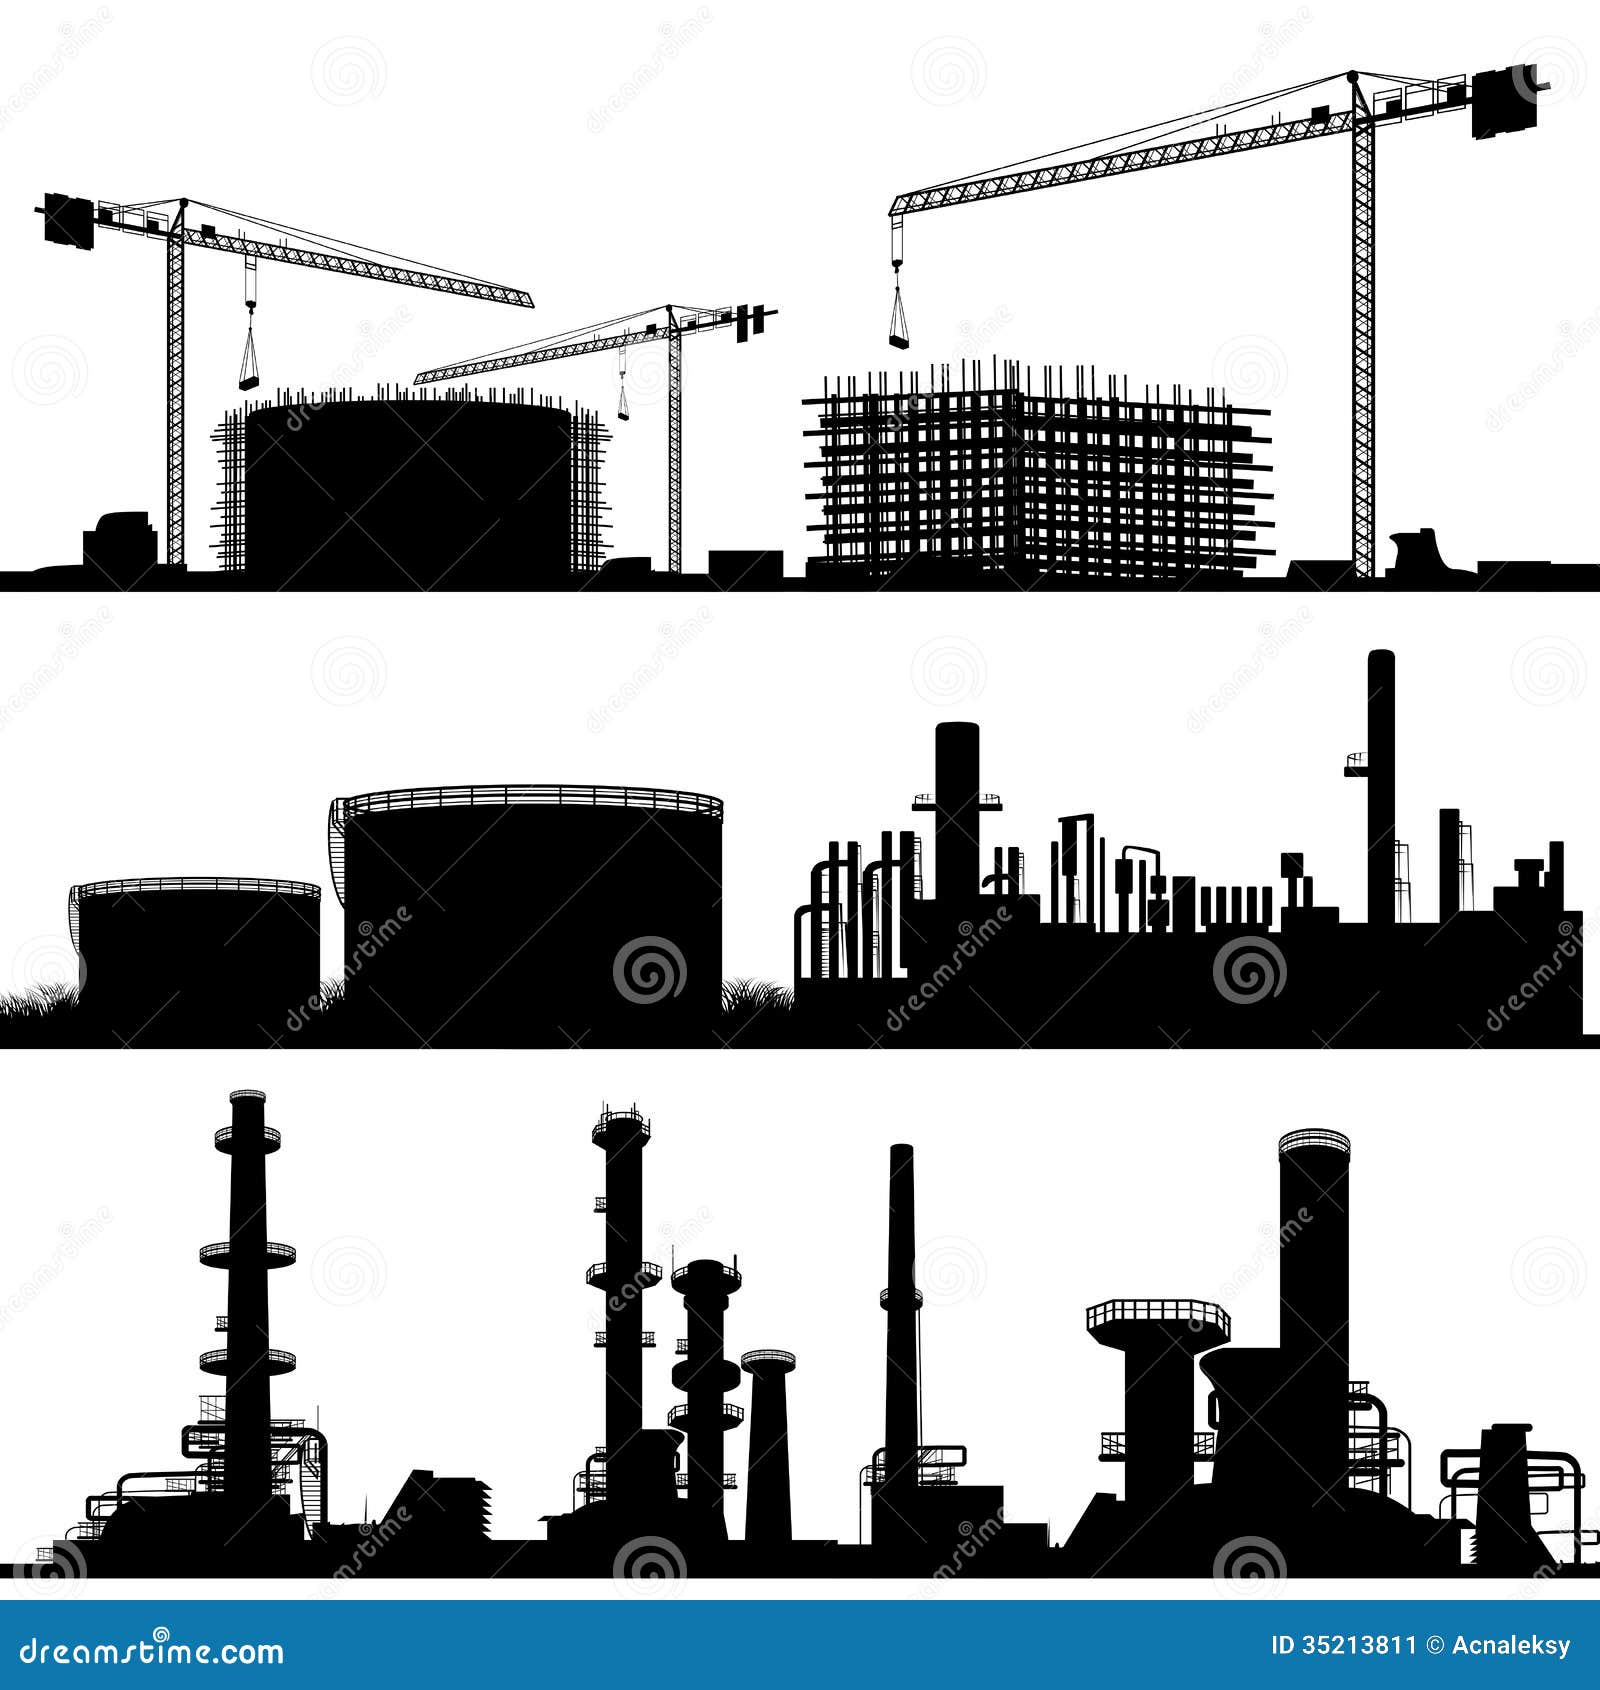 industrial technology clipart - photo #14